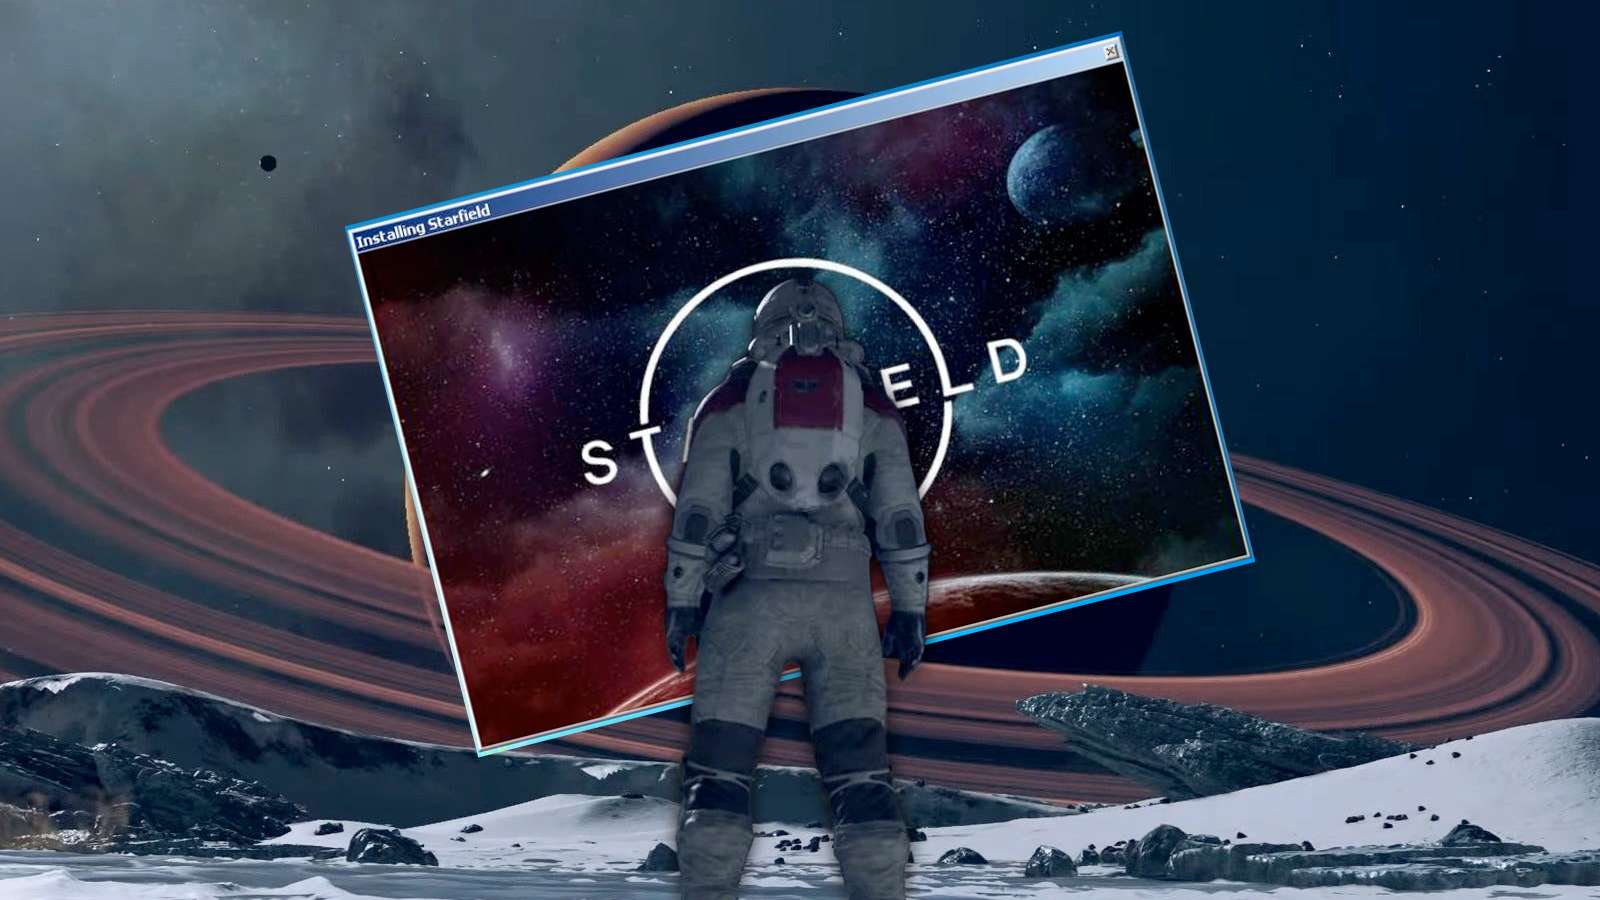 starfield art with the virus floating in space as the space man looks on